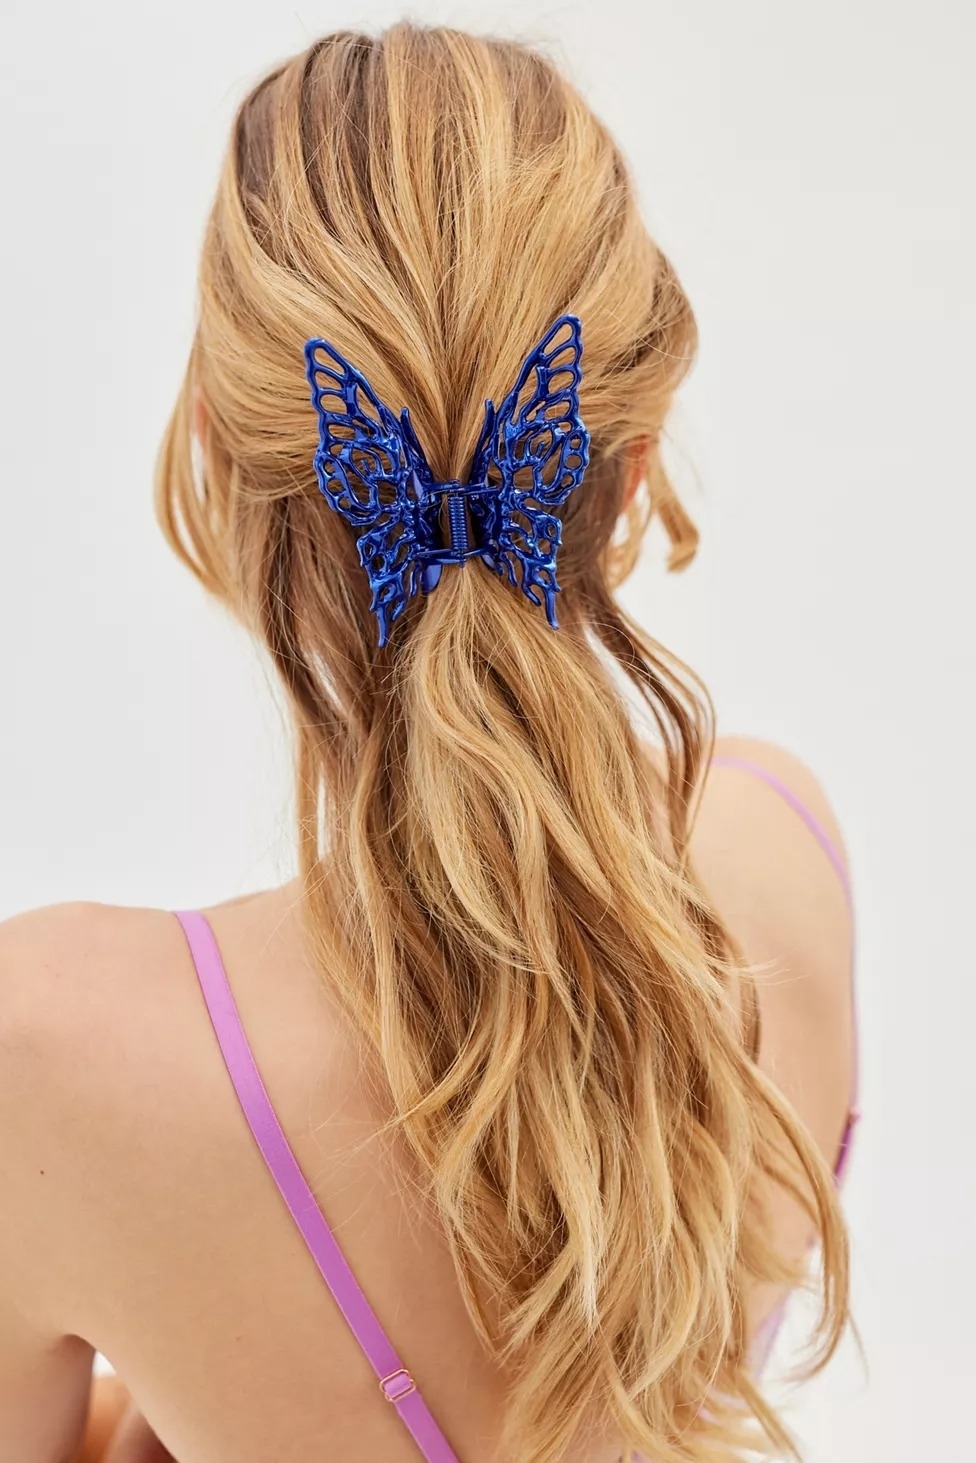 Model with blue metal butterfly clip in hair